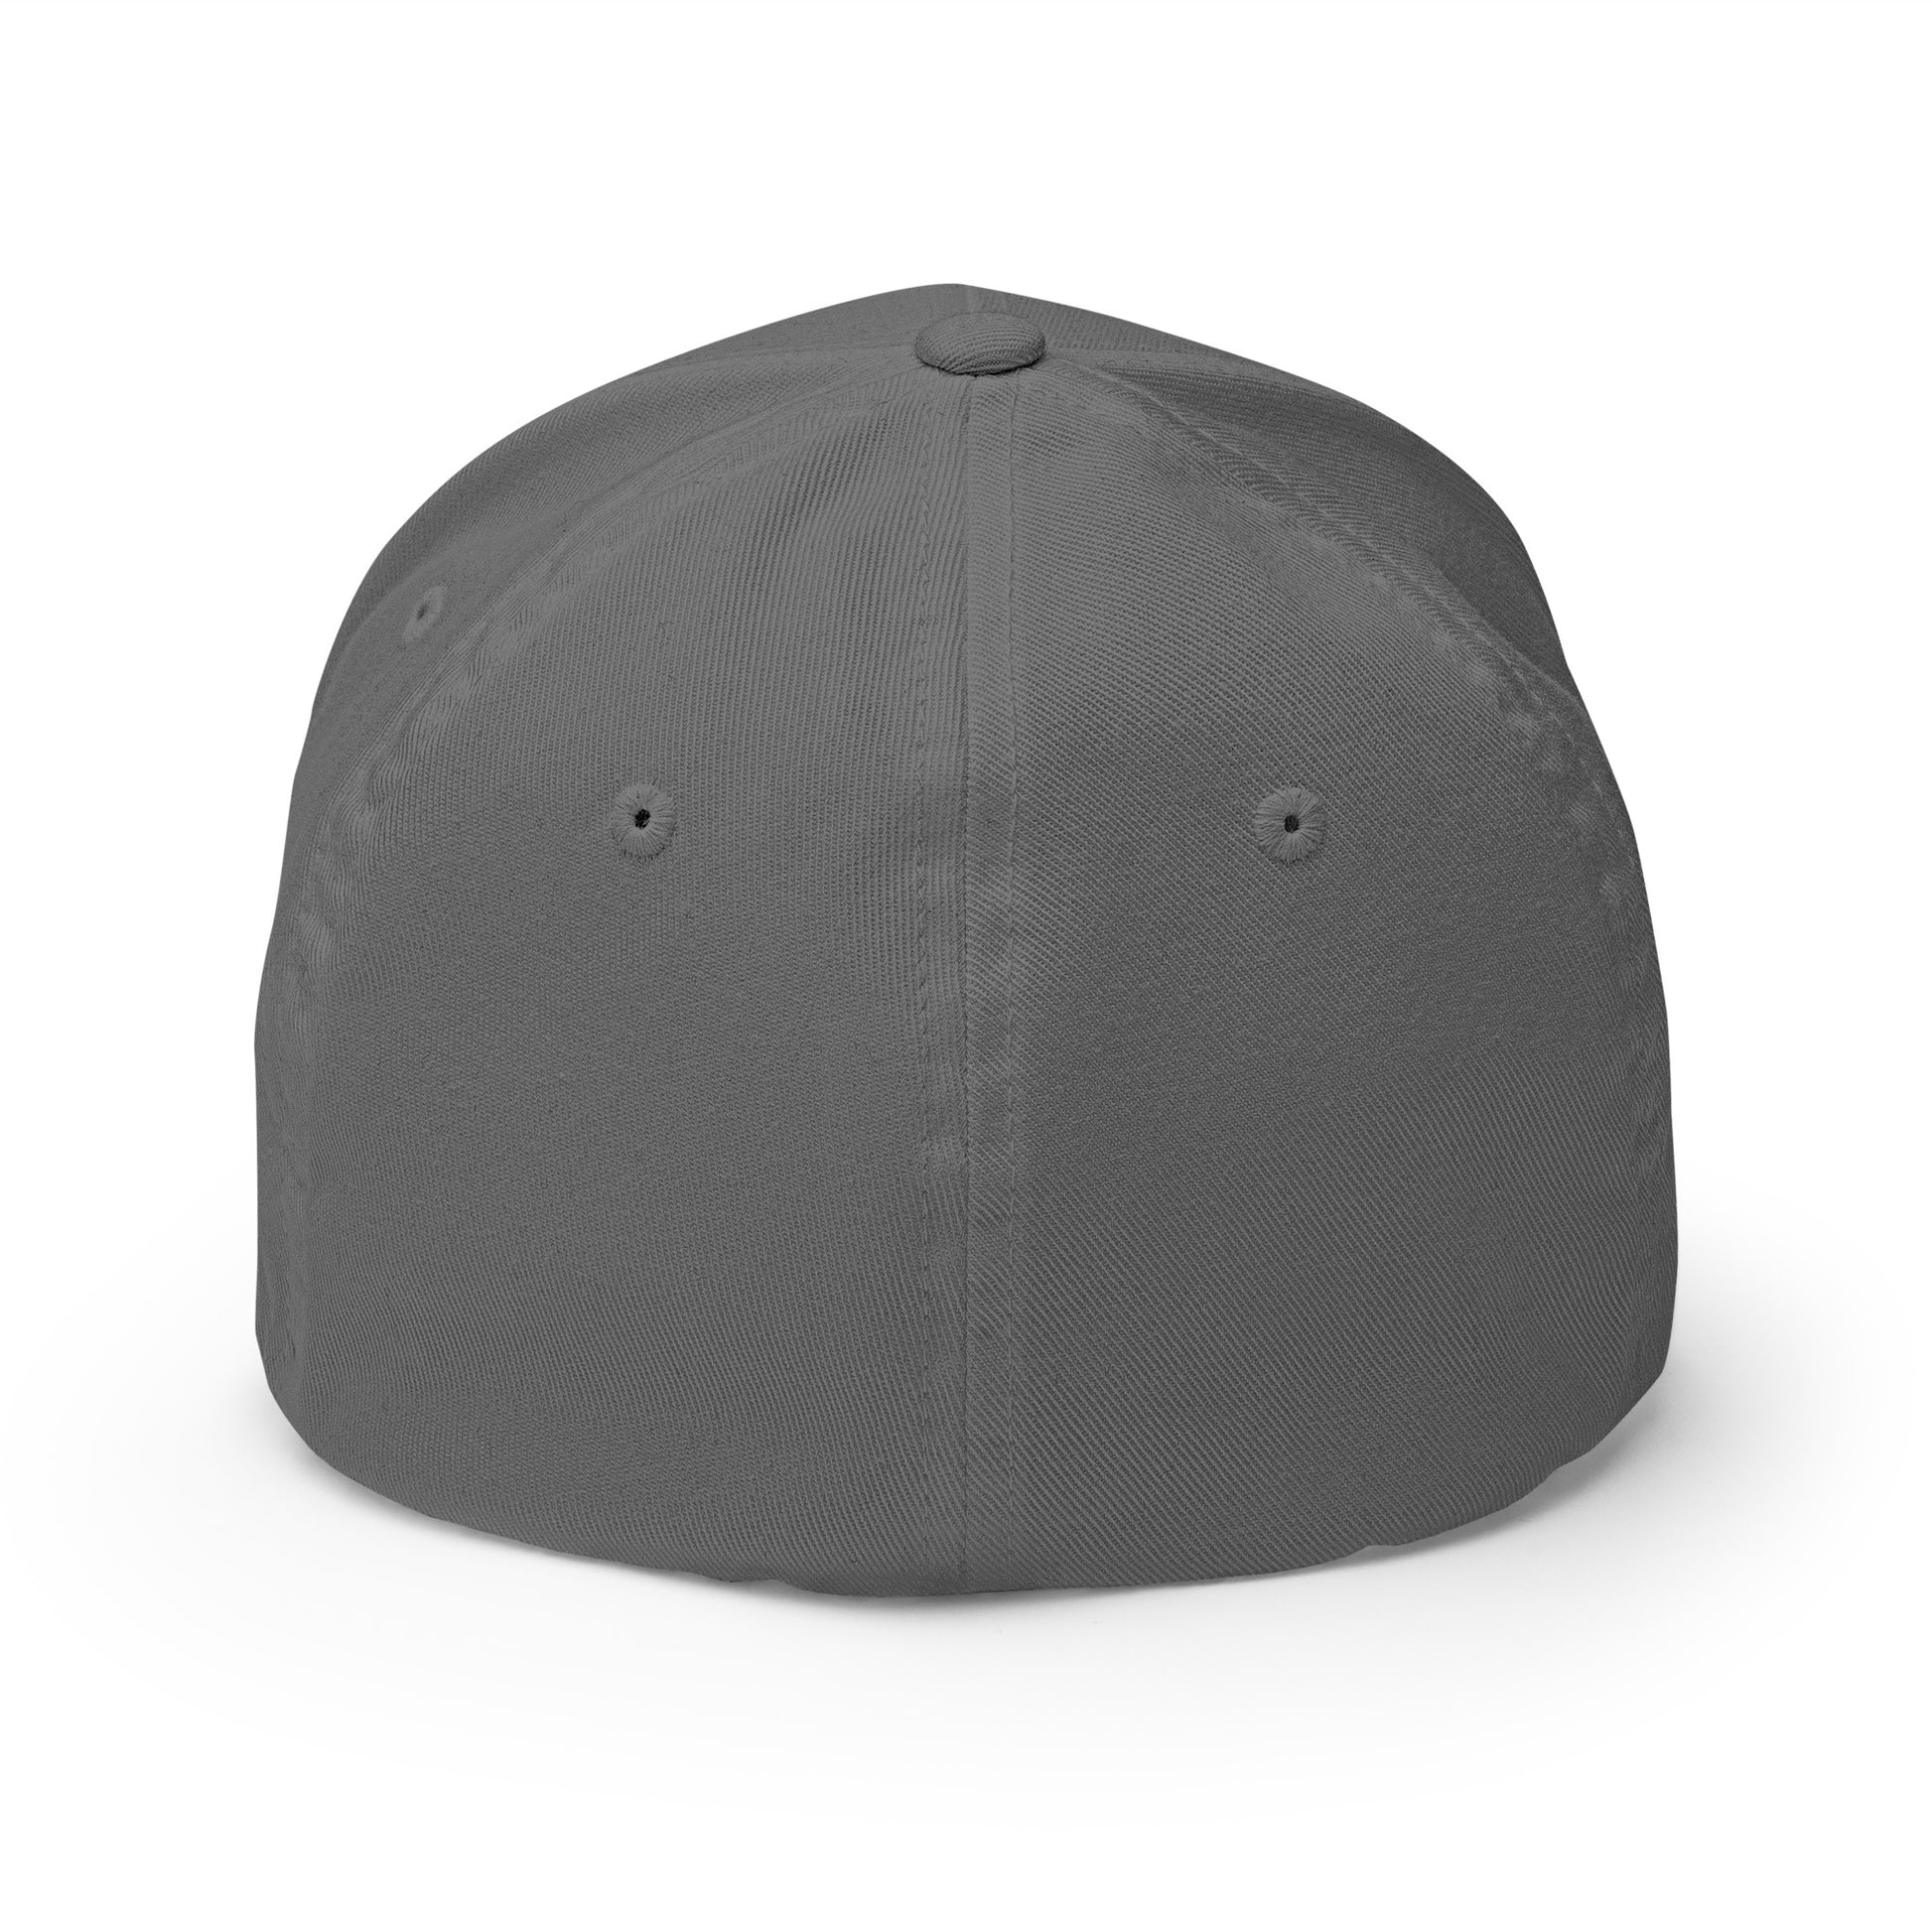 cap-from-the-back-with-geometric-shape-symbol